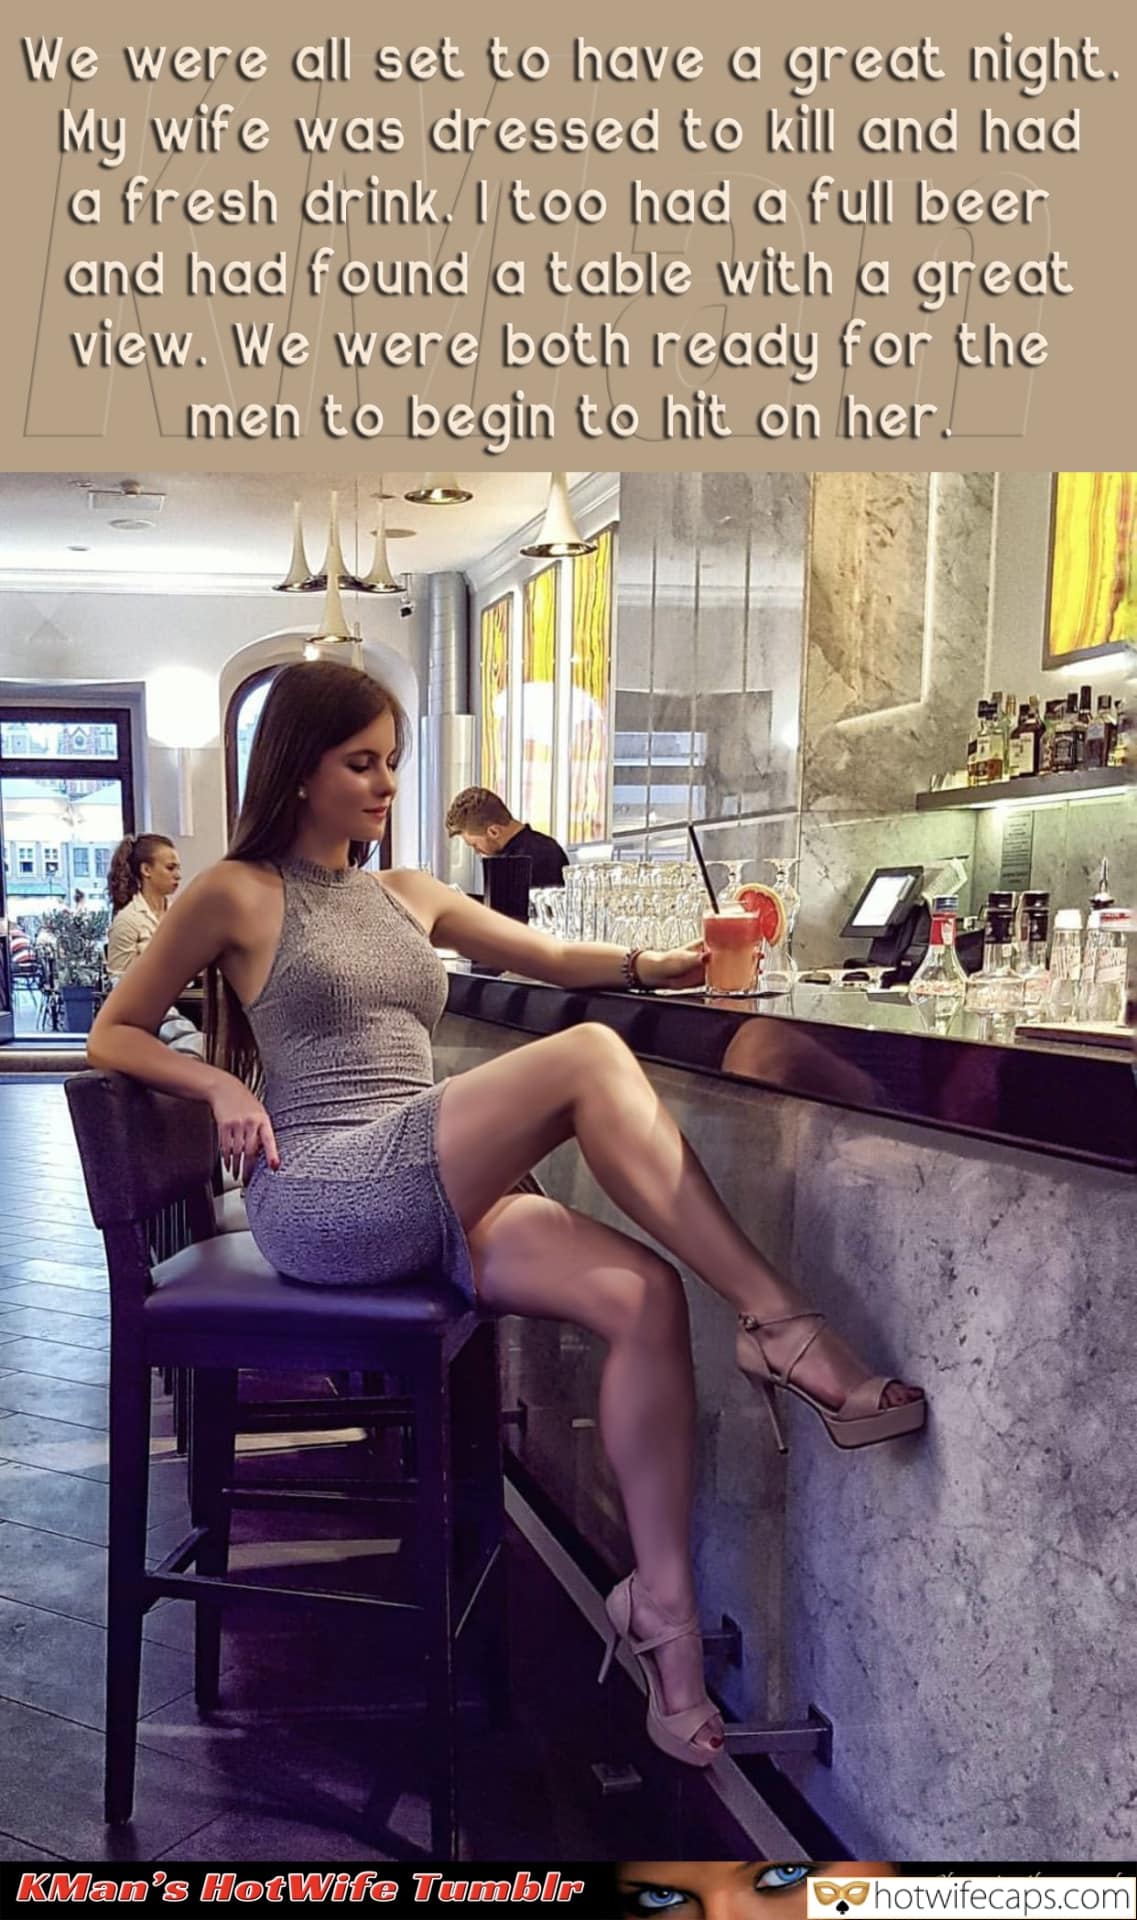 Wife Sharing Sexy Memes Public Getting Ready Cheating hotwife caption: We were all set to have a great night. My wife was dressed to kill and had a fresh drink. I too had a full beer and had found a table with a great view. We were both ready for...